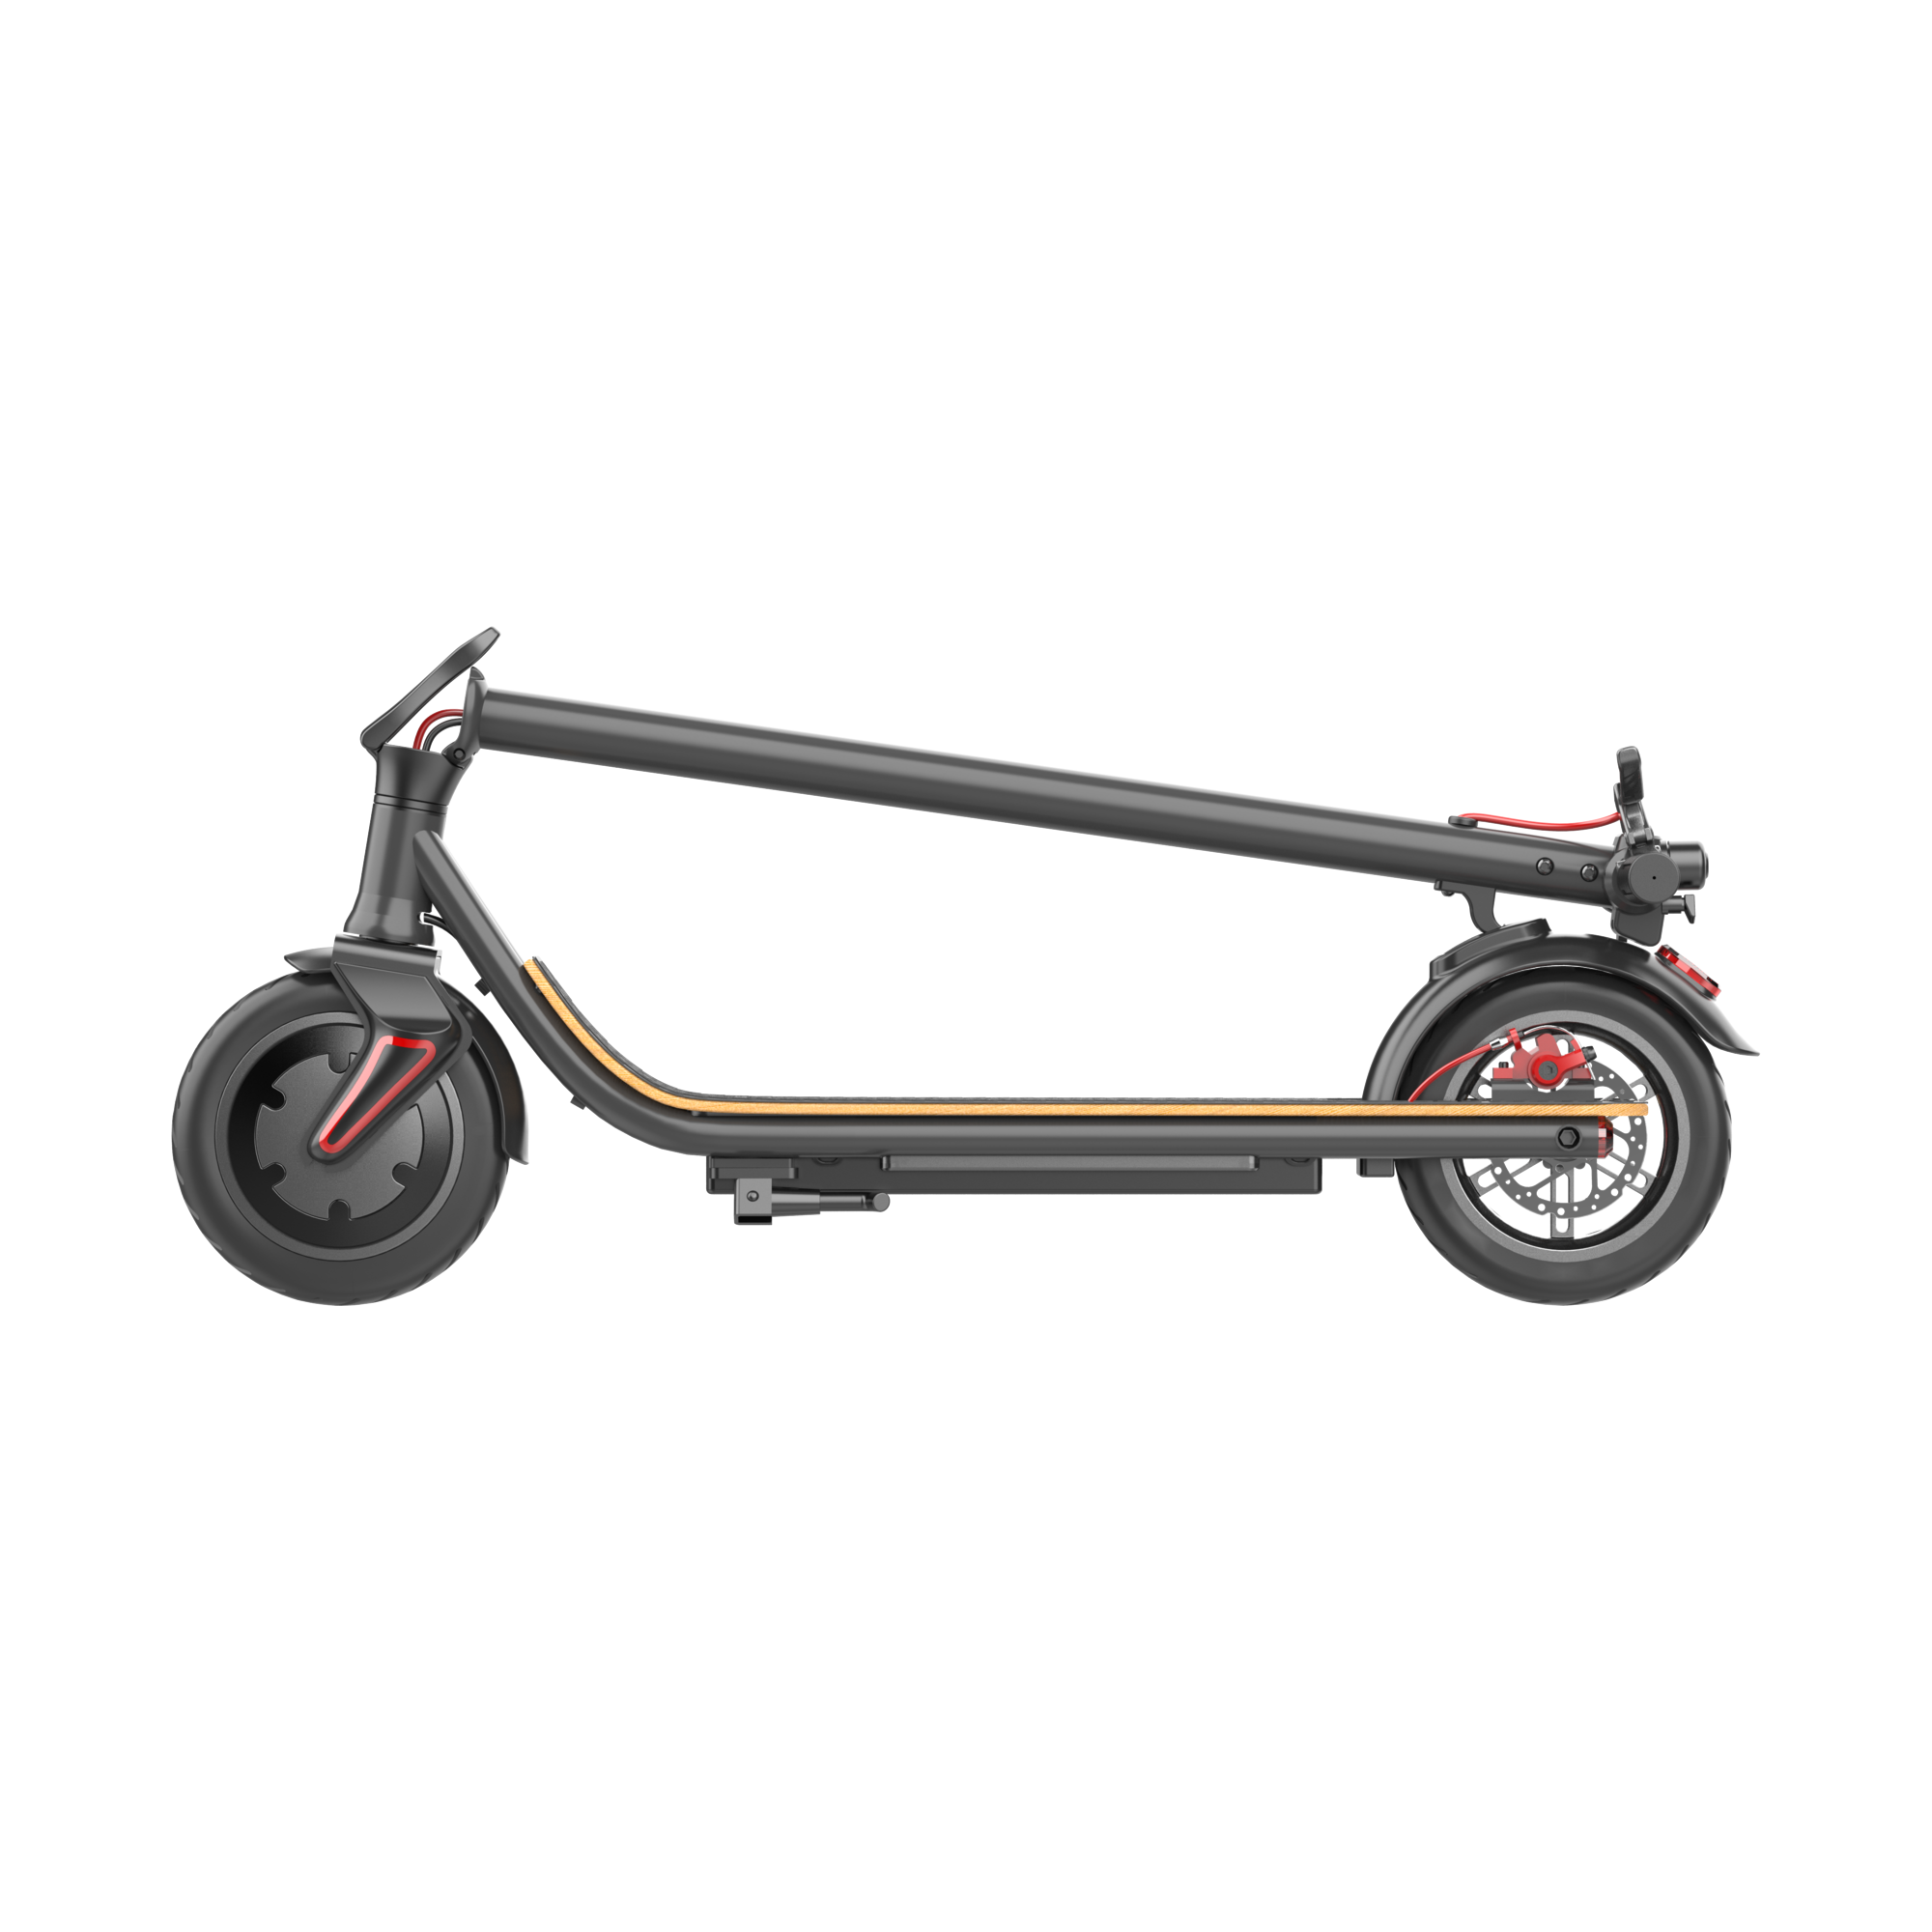 https://cdn.shopifycdn.net/s/files/1/0273/7691/0433/products/glarewheel-36v-8ah-350w-city-commuter-folding-electric-scooter-es-s10x-28413748707525.png?v=1618910344